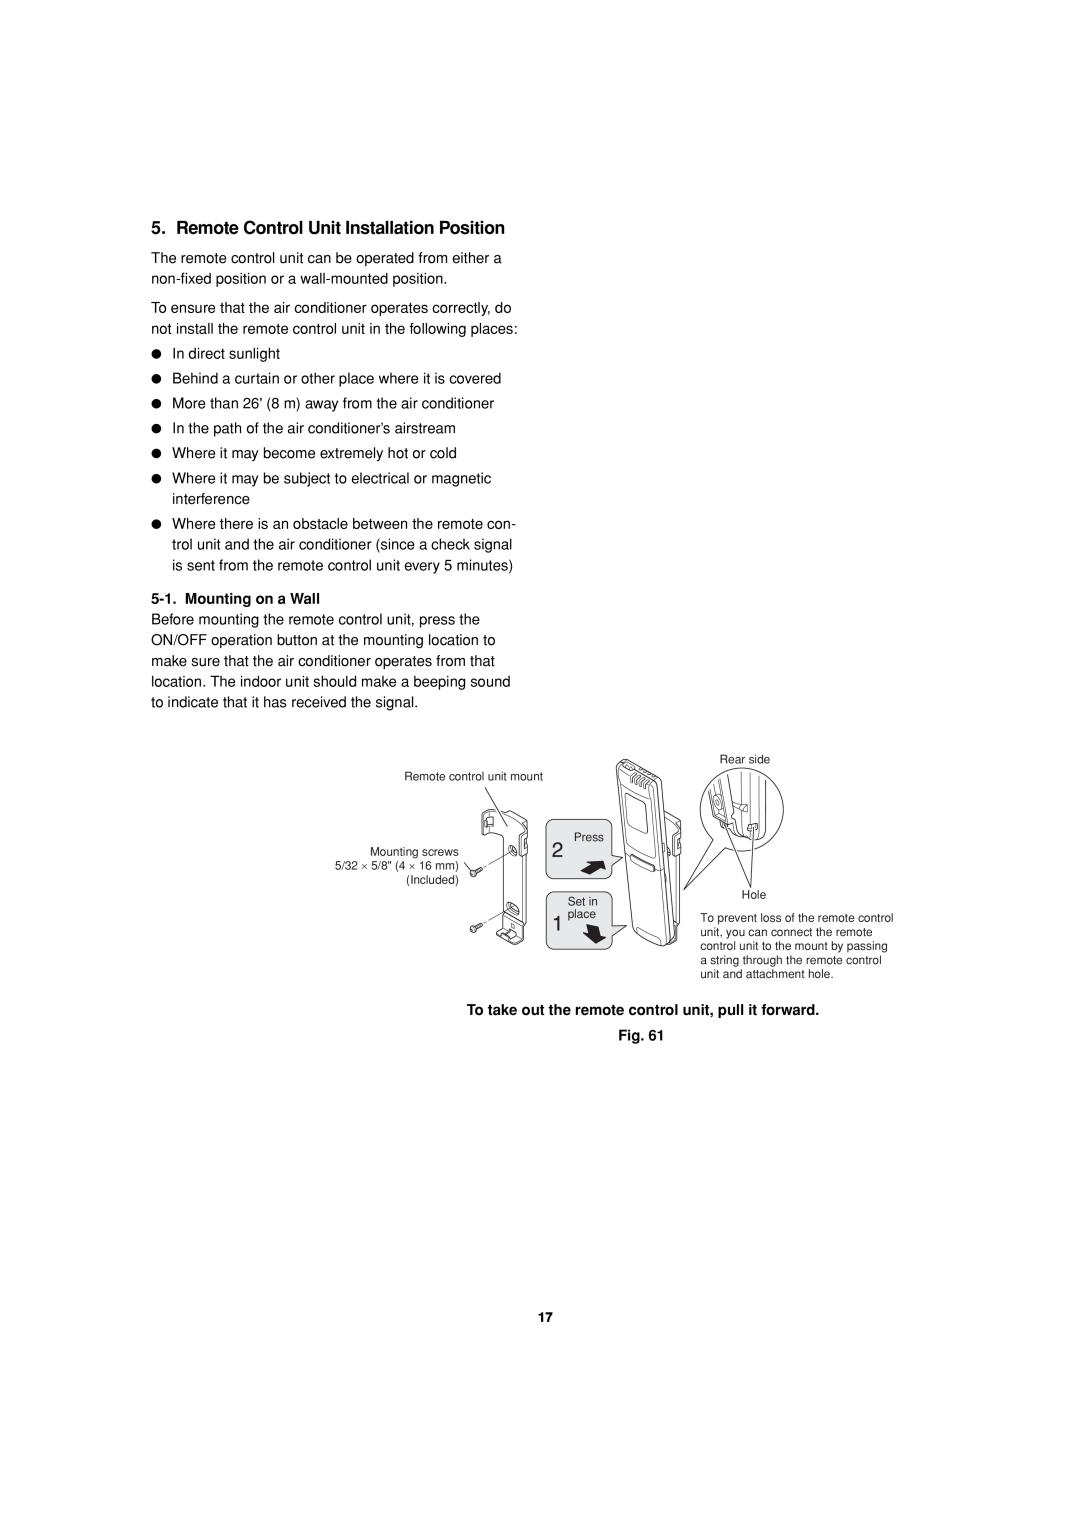 Sanyo KMS2472, KMS1872 service manual Remote Control Unit Installation Position, Mounting on a Wall 